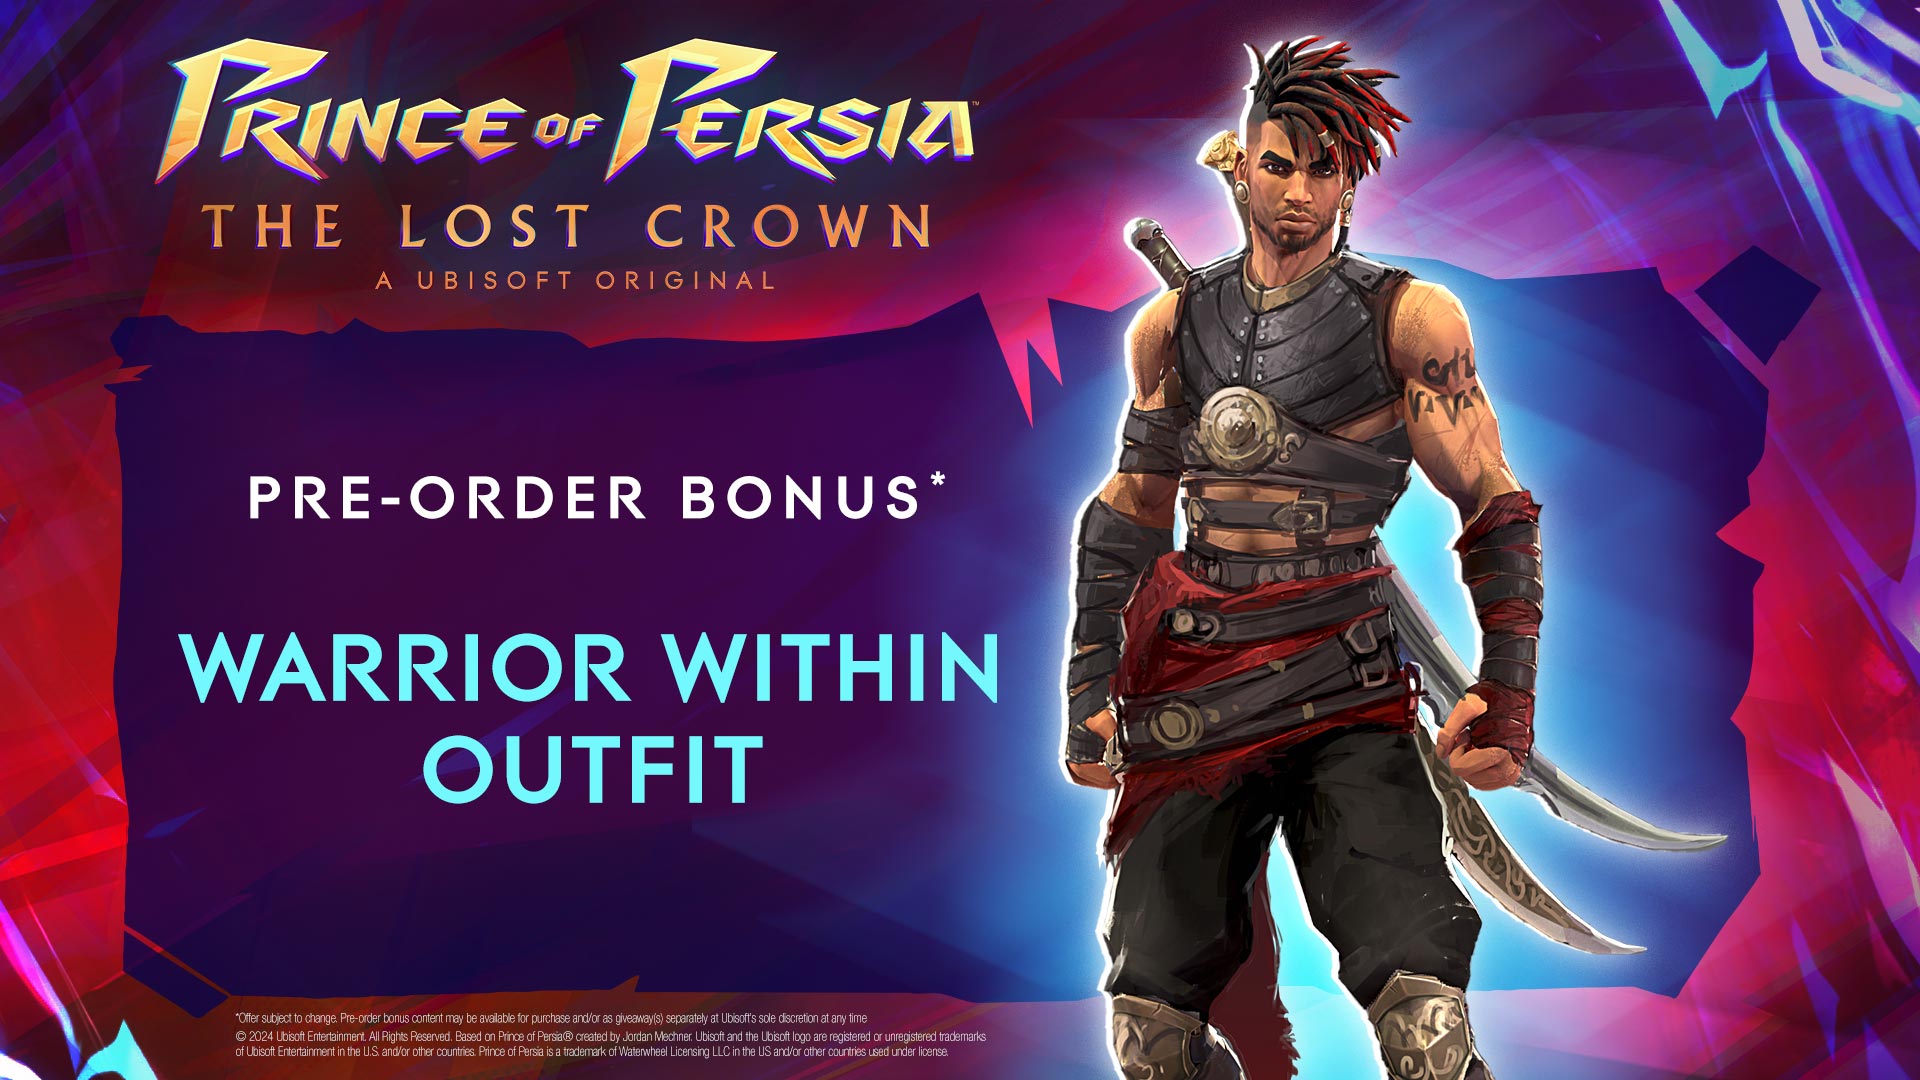 Steam Community :: Prince of Persia: Warrior Within